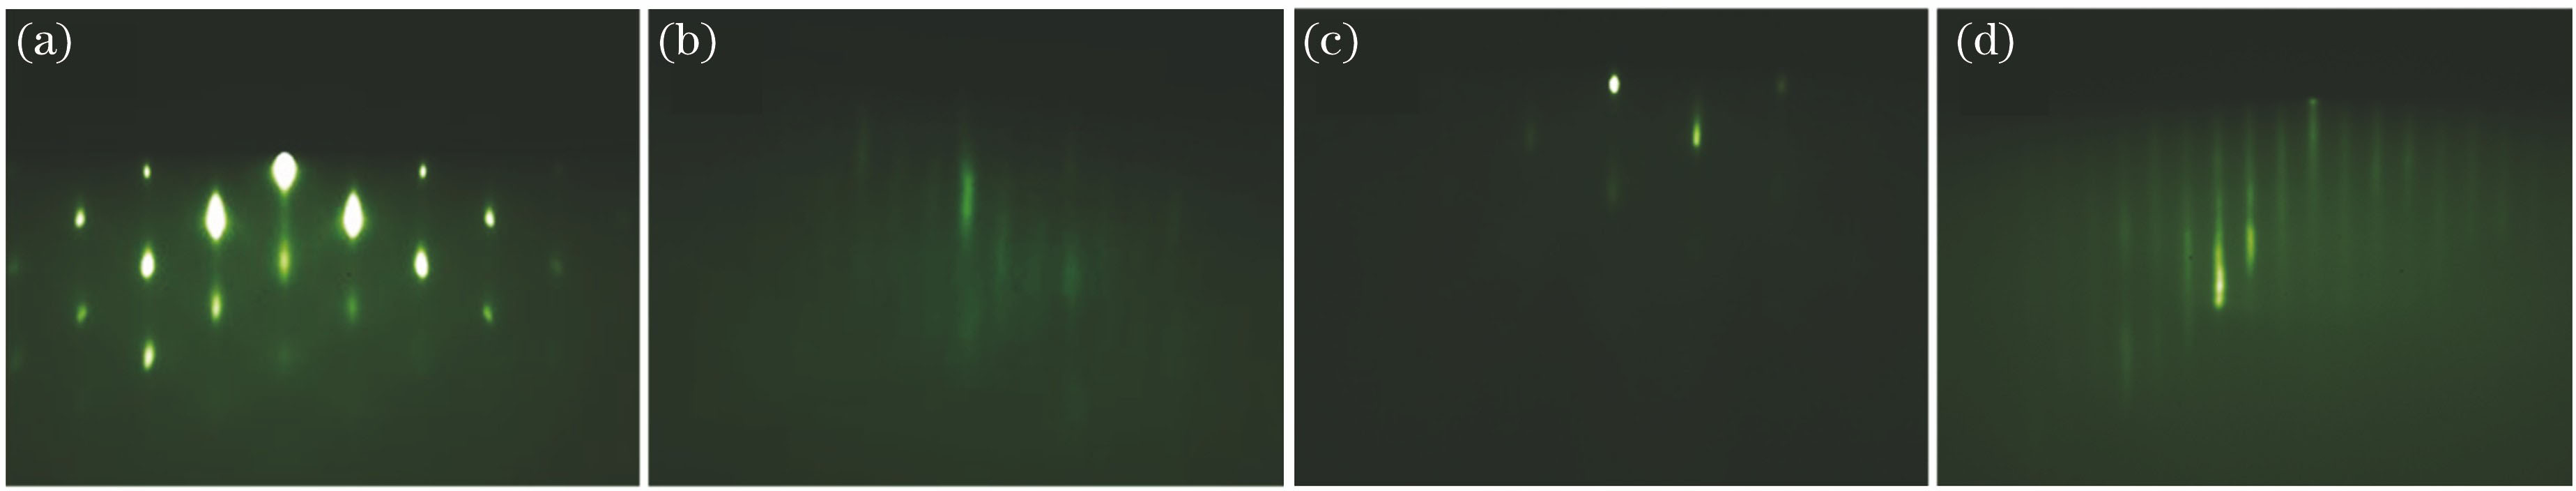 RHEED diffraction pattern during growth. (a) Deoxidation processing of GaAs substrate; (b) growth of GaAs buffer layer; (c) growth of InxGa1-xAs film by adding In component; (d) growth of InxGa1-xAs film